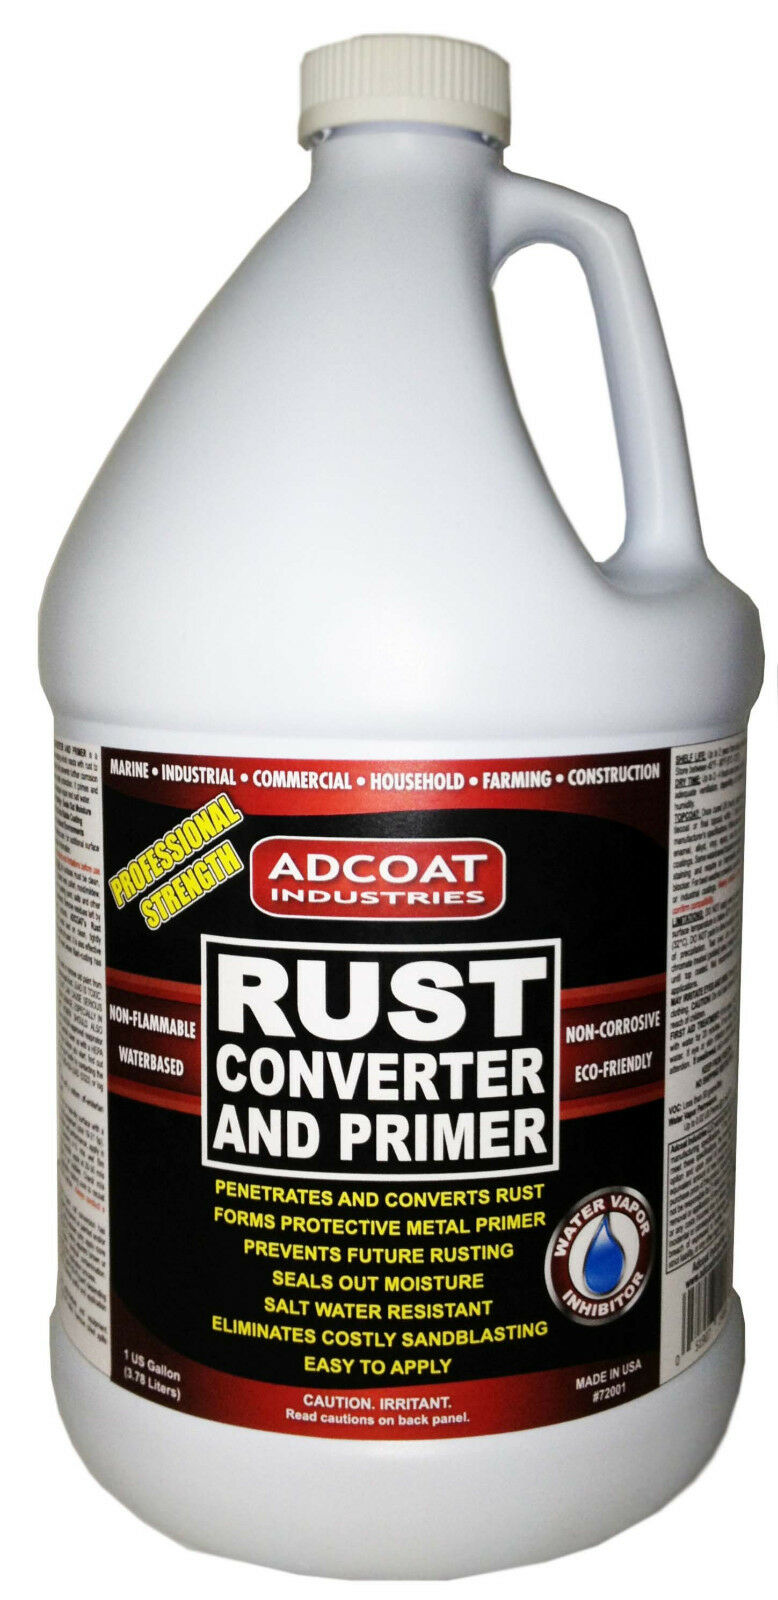 Rust Converter And Primer: Gallon -- One Step To Remove Rust And Prime Surface